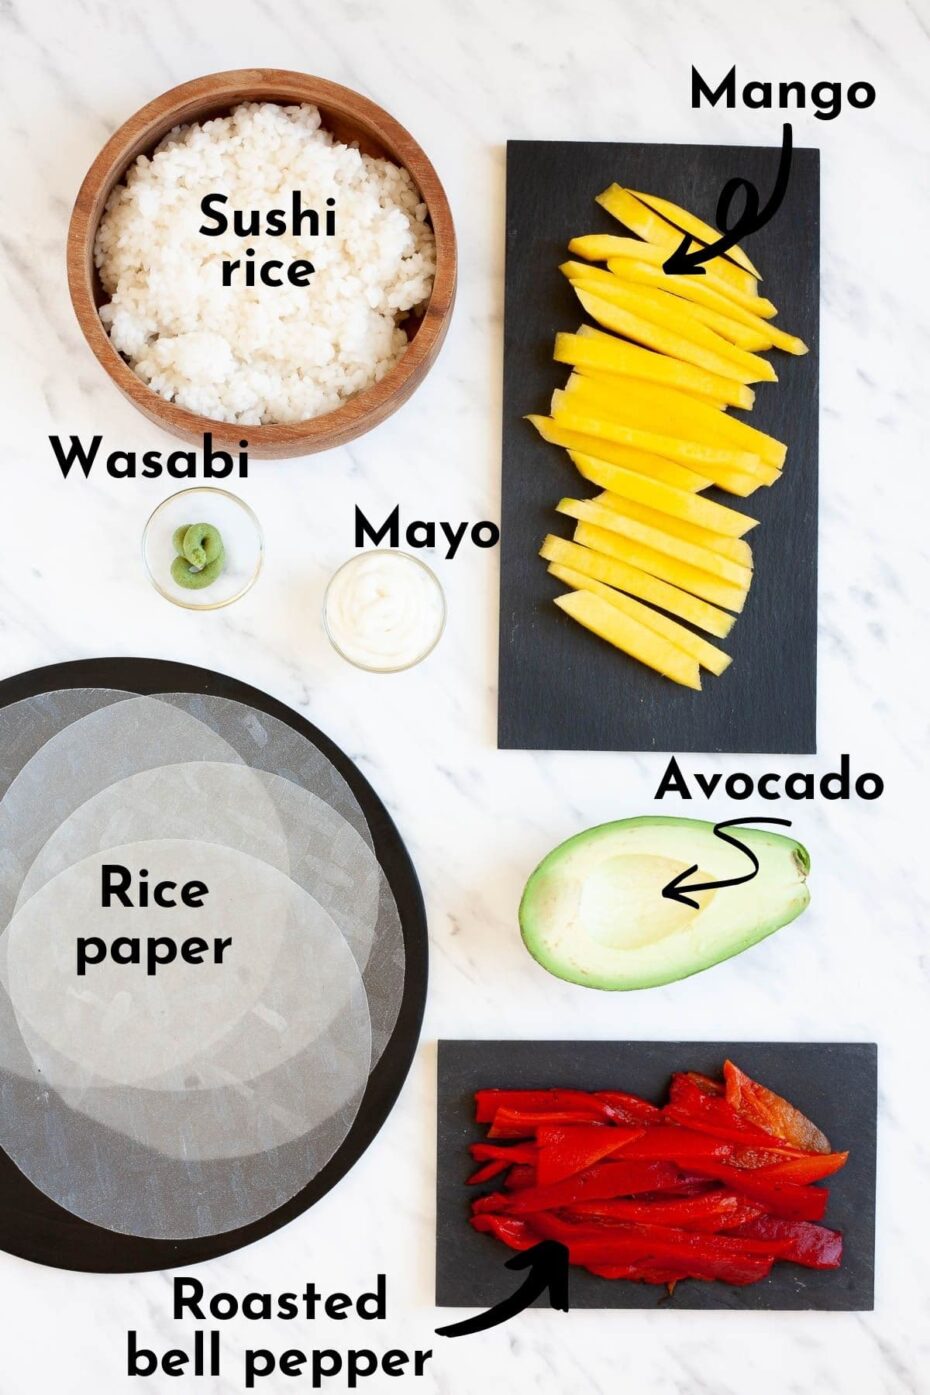 Ingredients to make rice paper sushi without seaweed is displayed in small bowls like rice, wasabi, mayo, mango slices, red pepper slices, half avocado and rice paper sheets